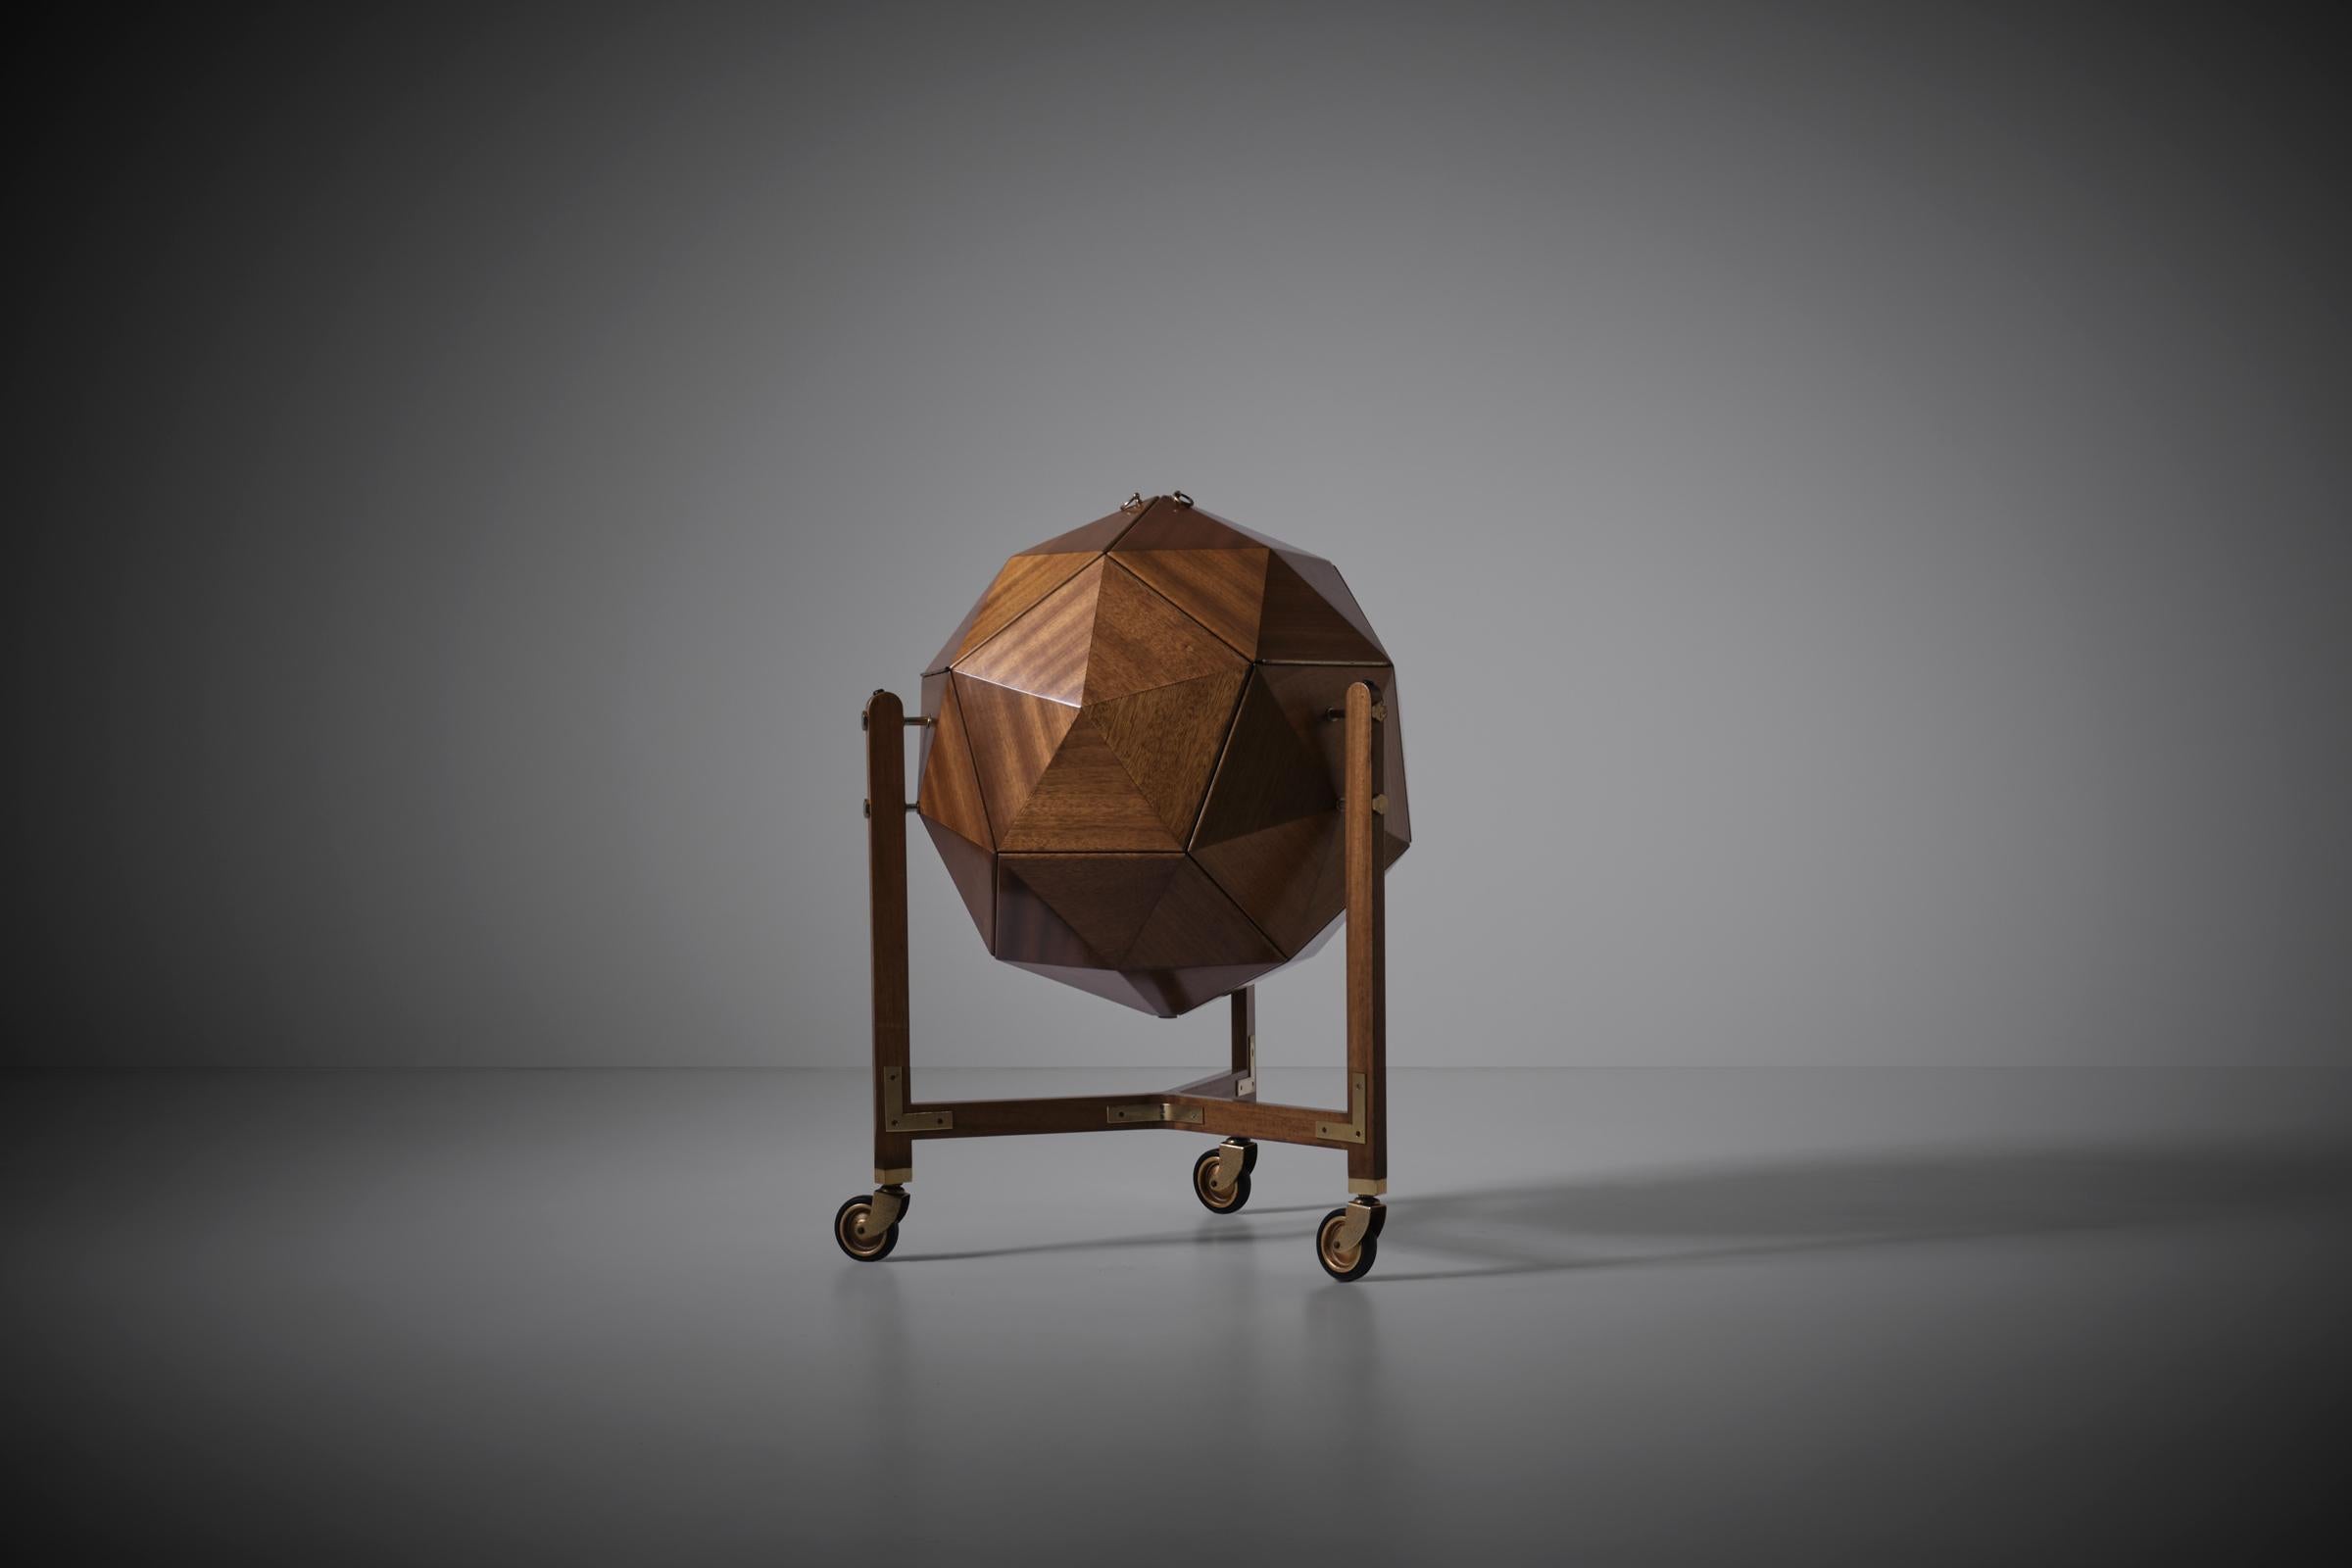 Sculptural Polyhedron shaped bar cabinet by M. Vuillermoz for Dambrine, France 1960s. Stunning three dimensional design constructed out of solid Mahogany triangular elements merged together into a larger pentagonal shape and finished with nice brass